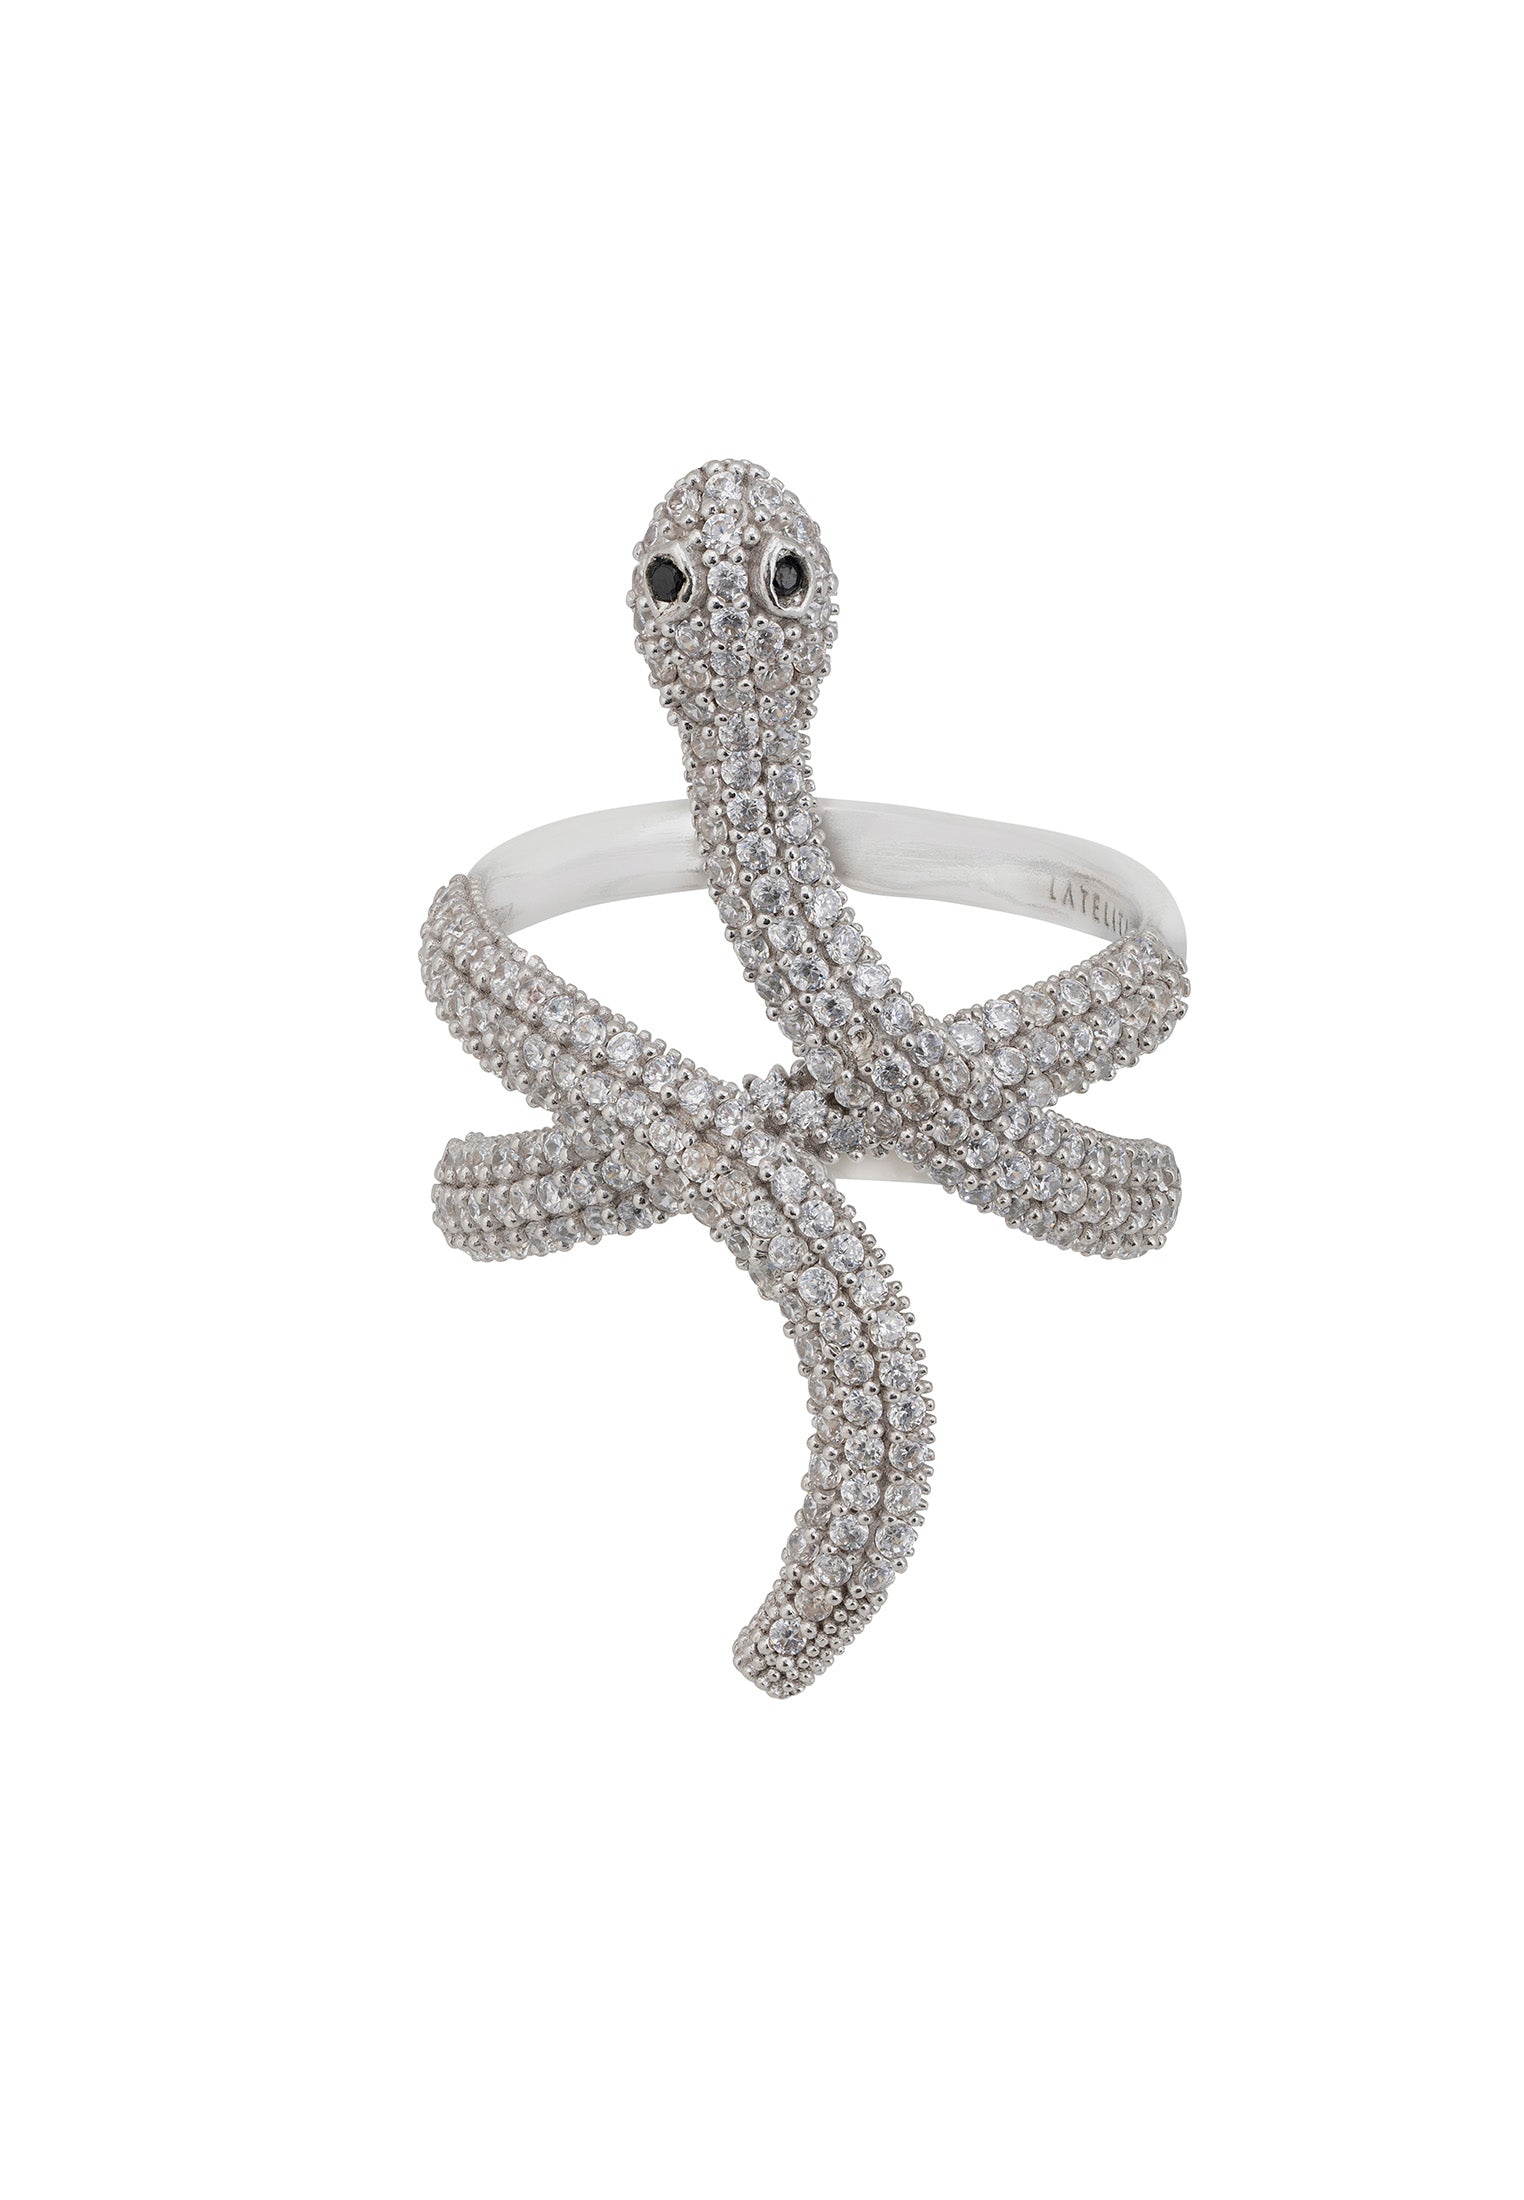 Serpentina Snake Cocktail Ring Silver White CZ